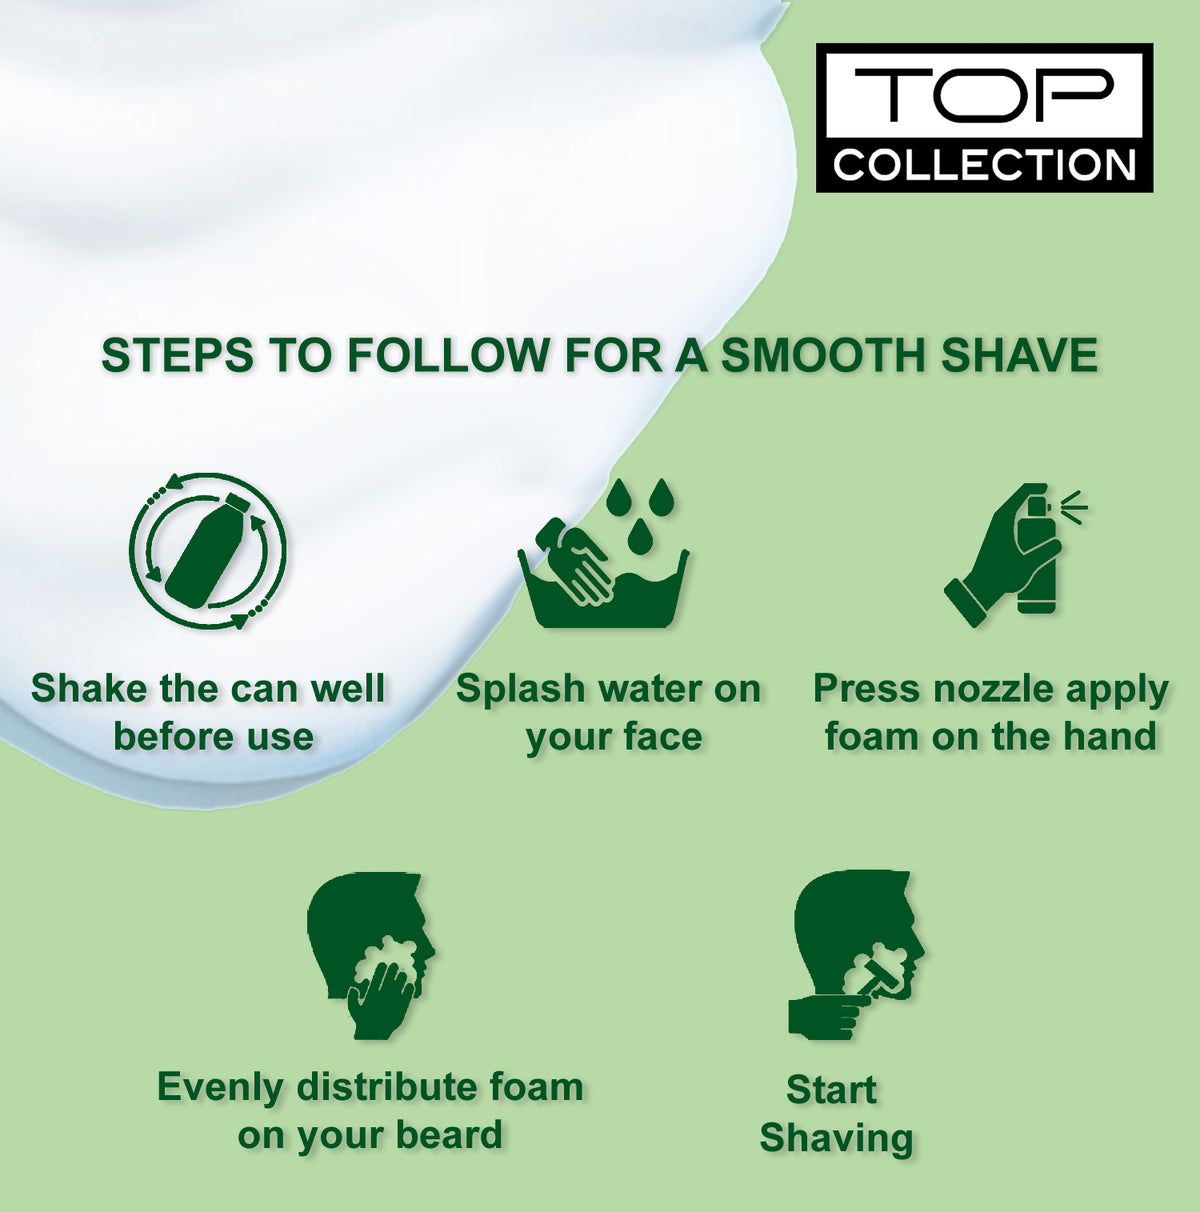 Top Collection Shaving Cream - Citrus Lime, 500g